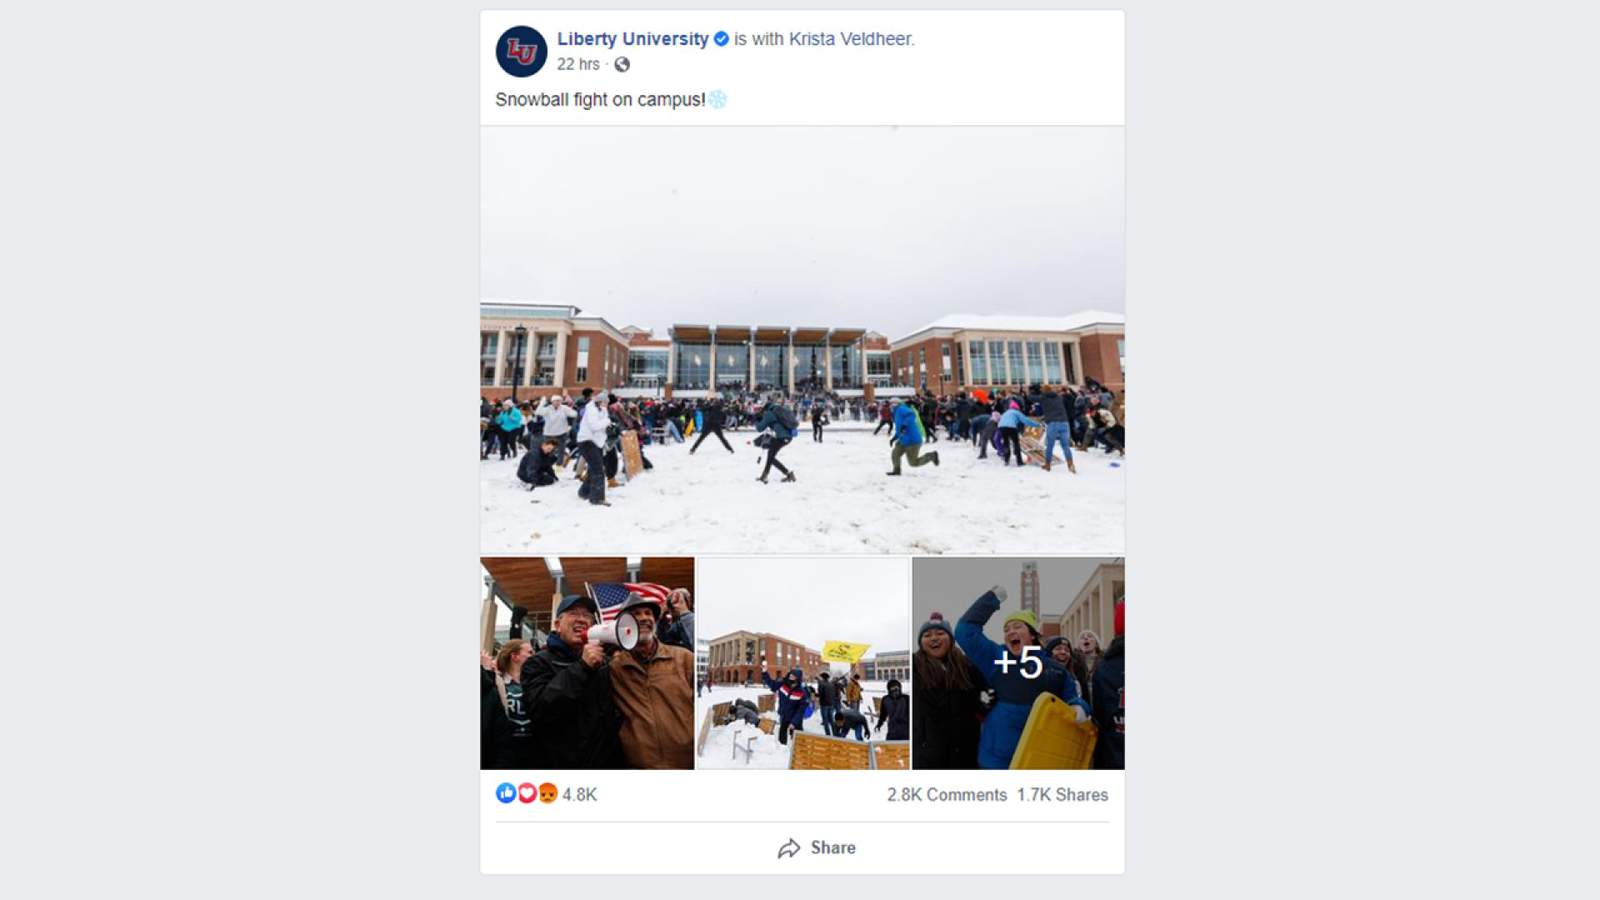 ‘I messed up’: Liberty University president admits to failing coronavirus guidelines in massive snowball fight